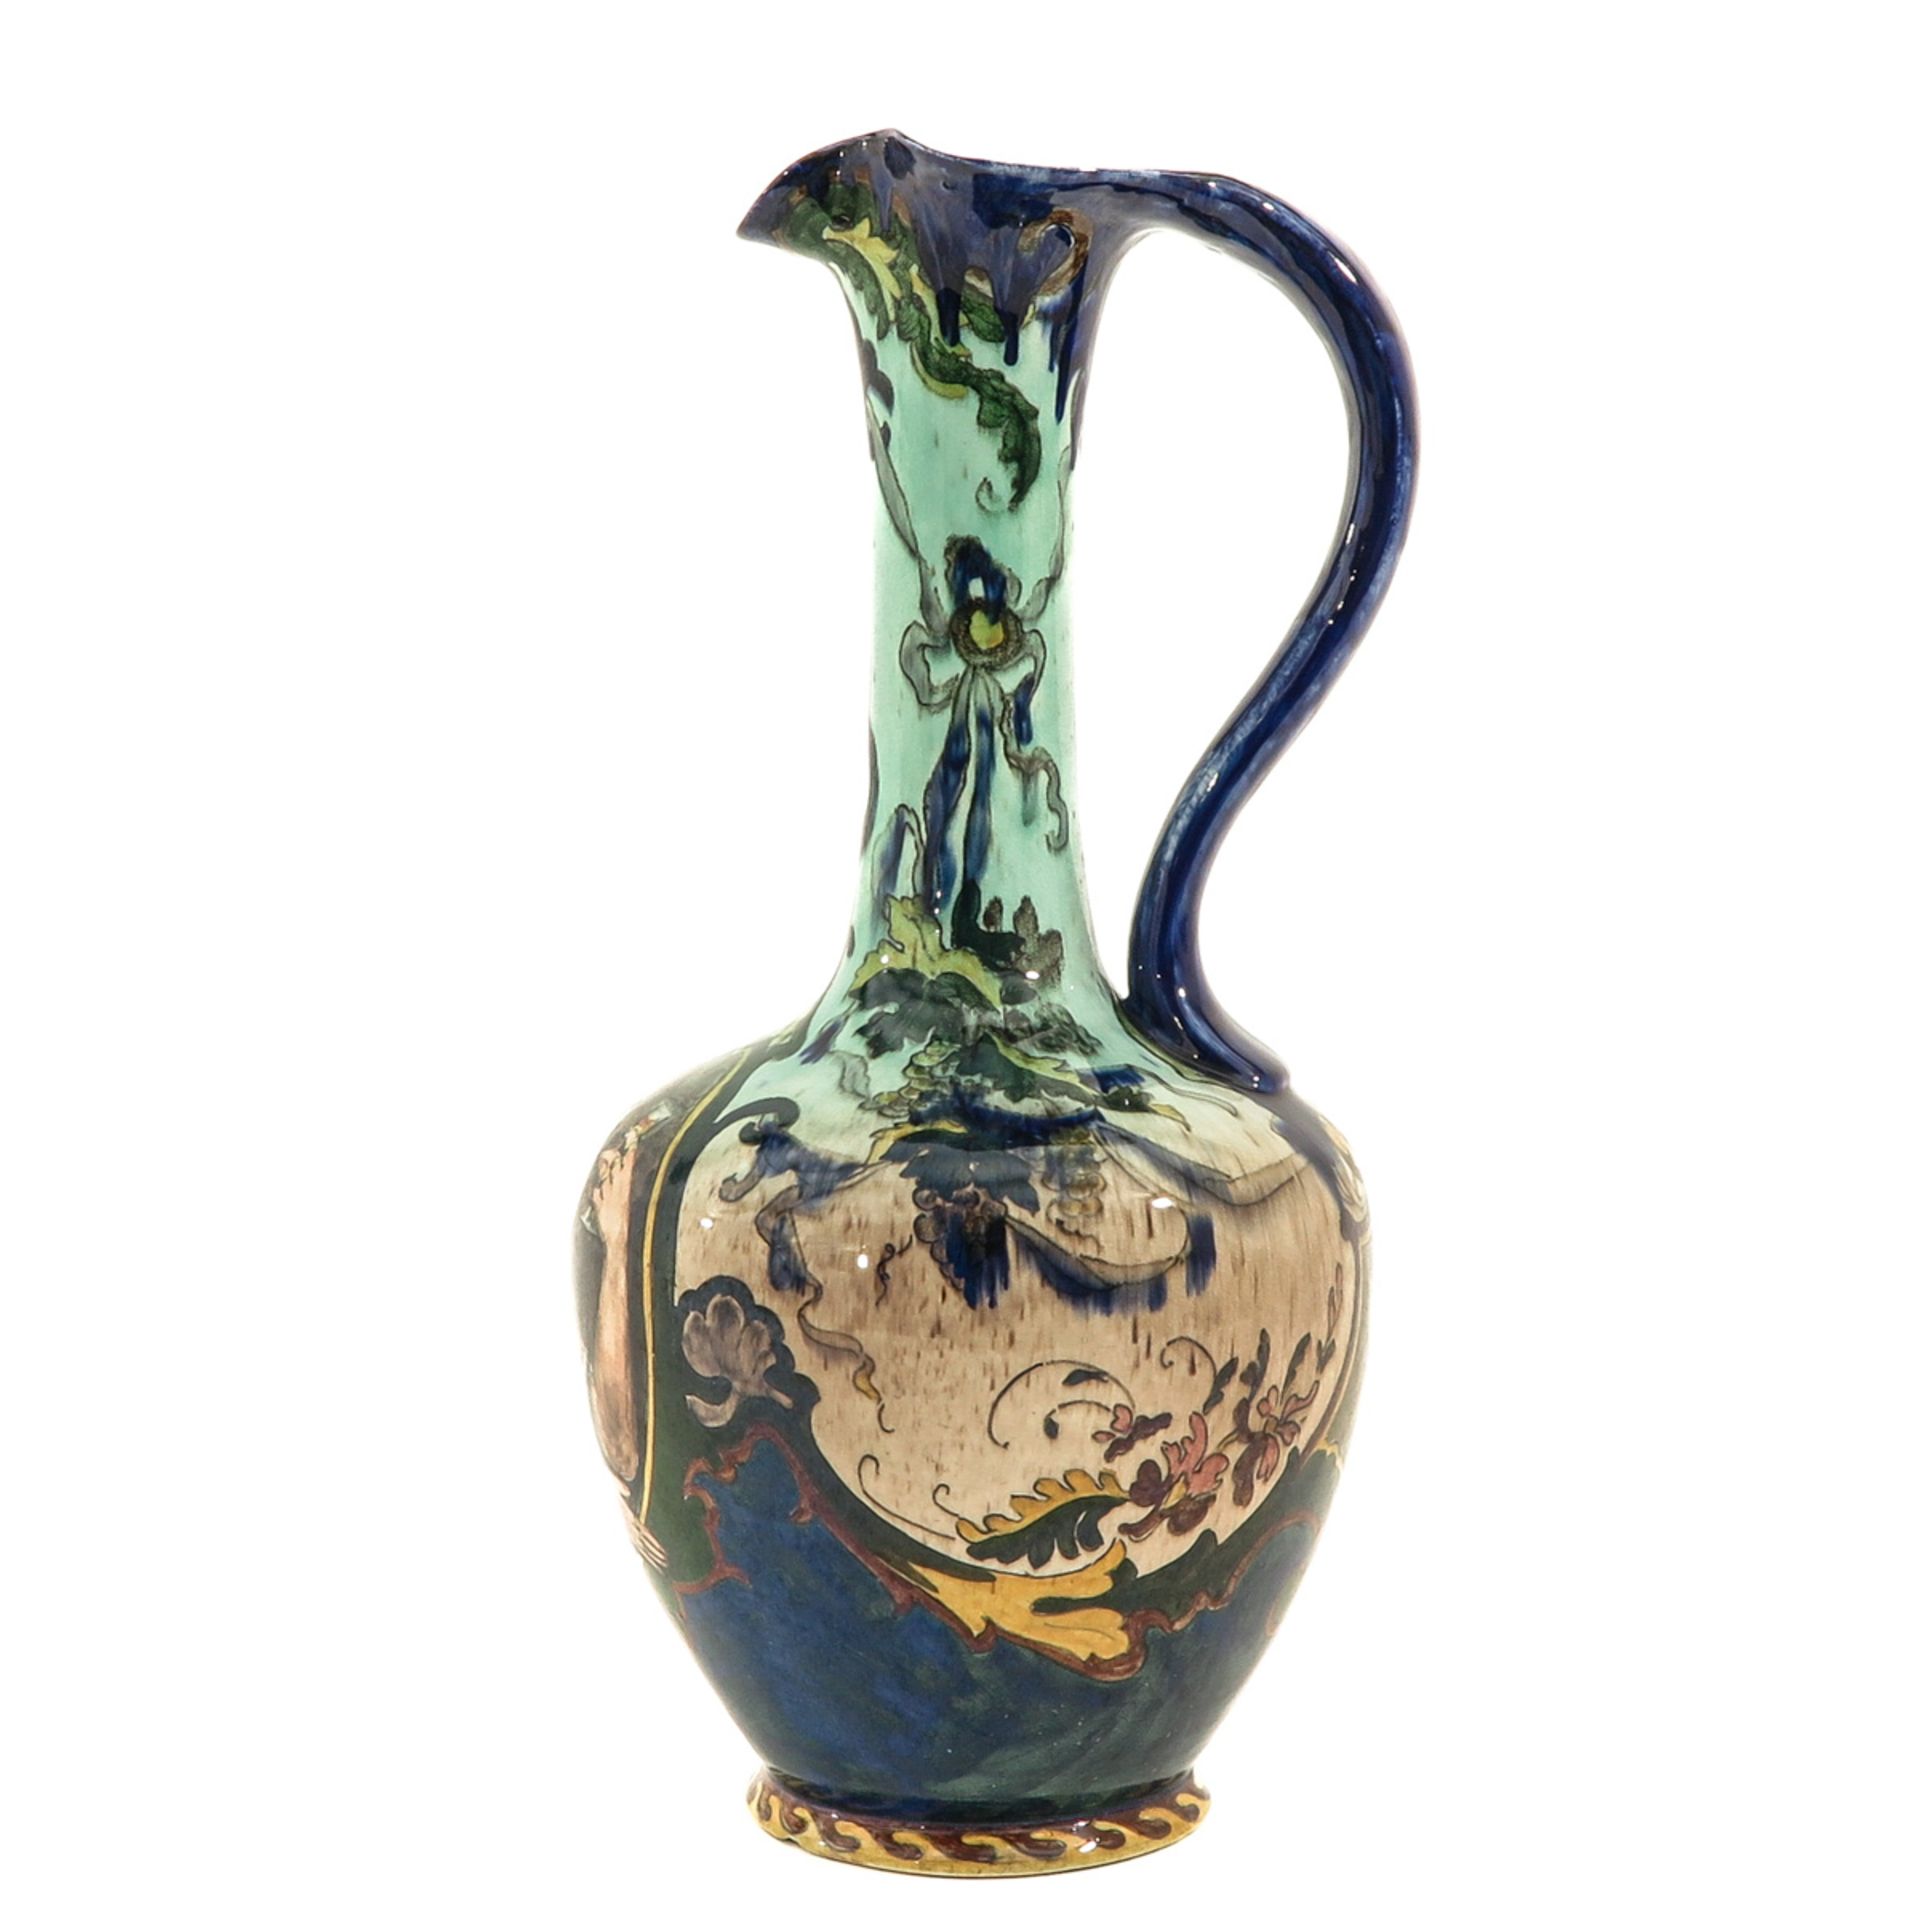 A Faience de Purmerend Pottery Jug - Image 2 of 10